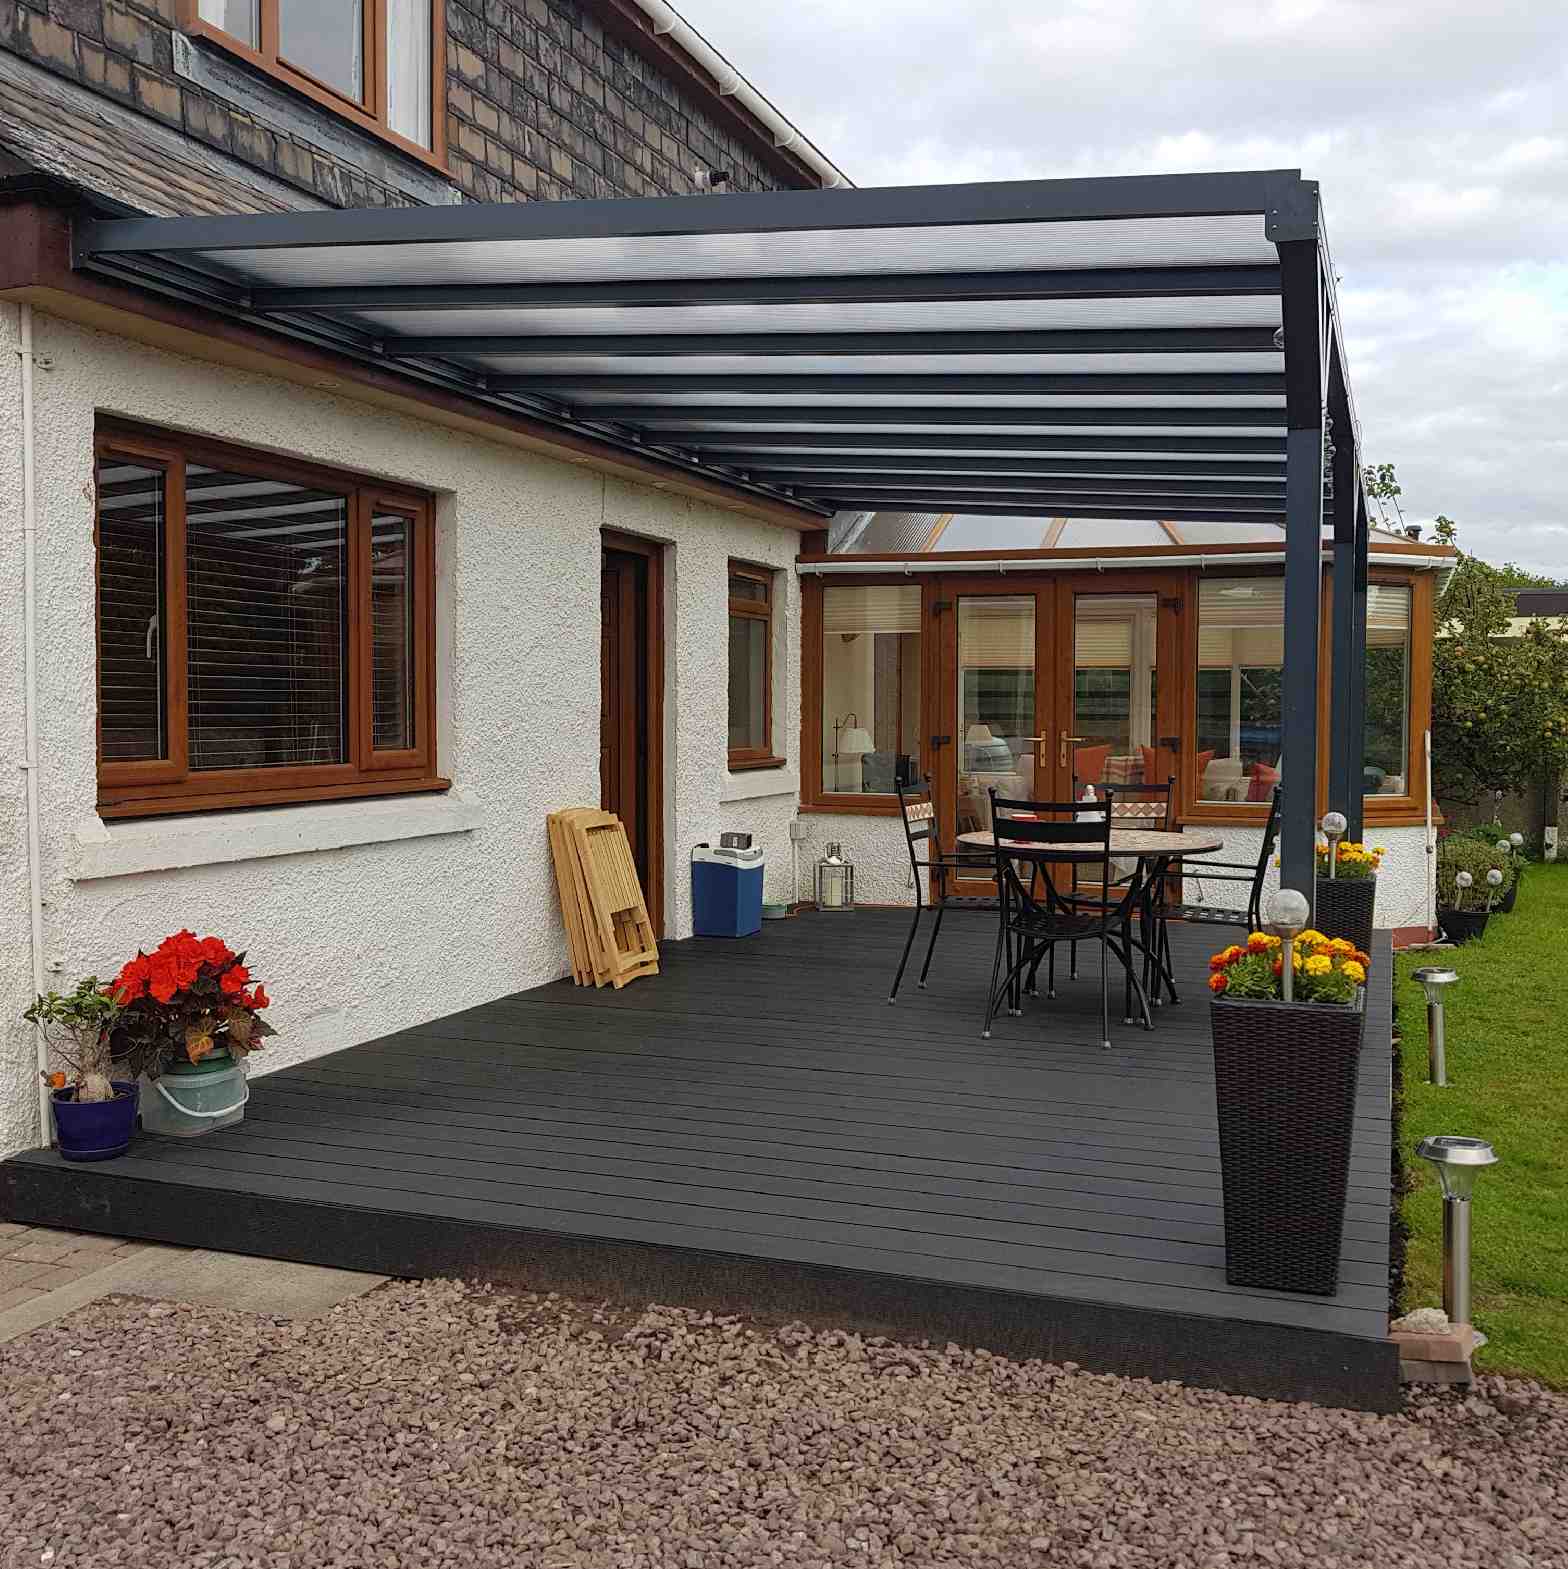 Buy Omega Verandah, Anthracite Grey, 16mm Polycarbonate Glazing - 11.4m (W) x 3.5m (P), (5) Supporting Posts online today